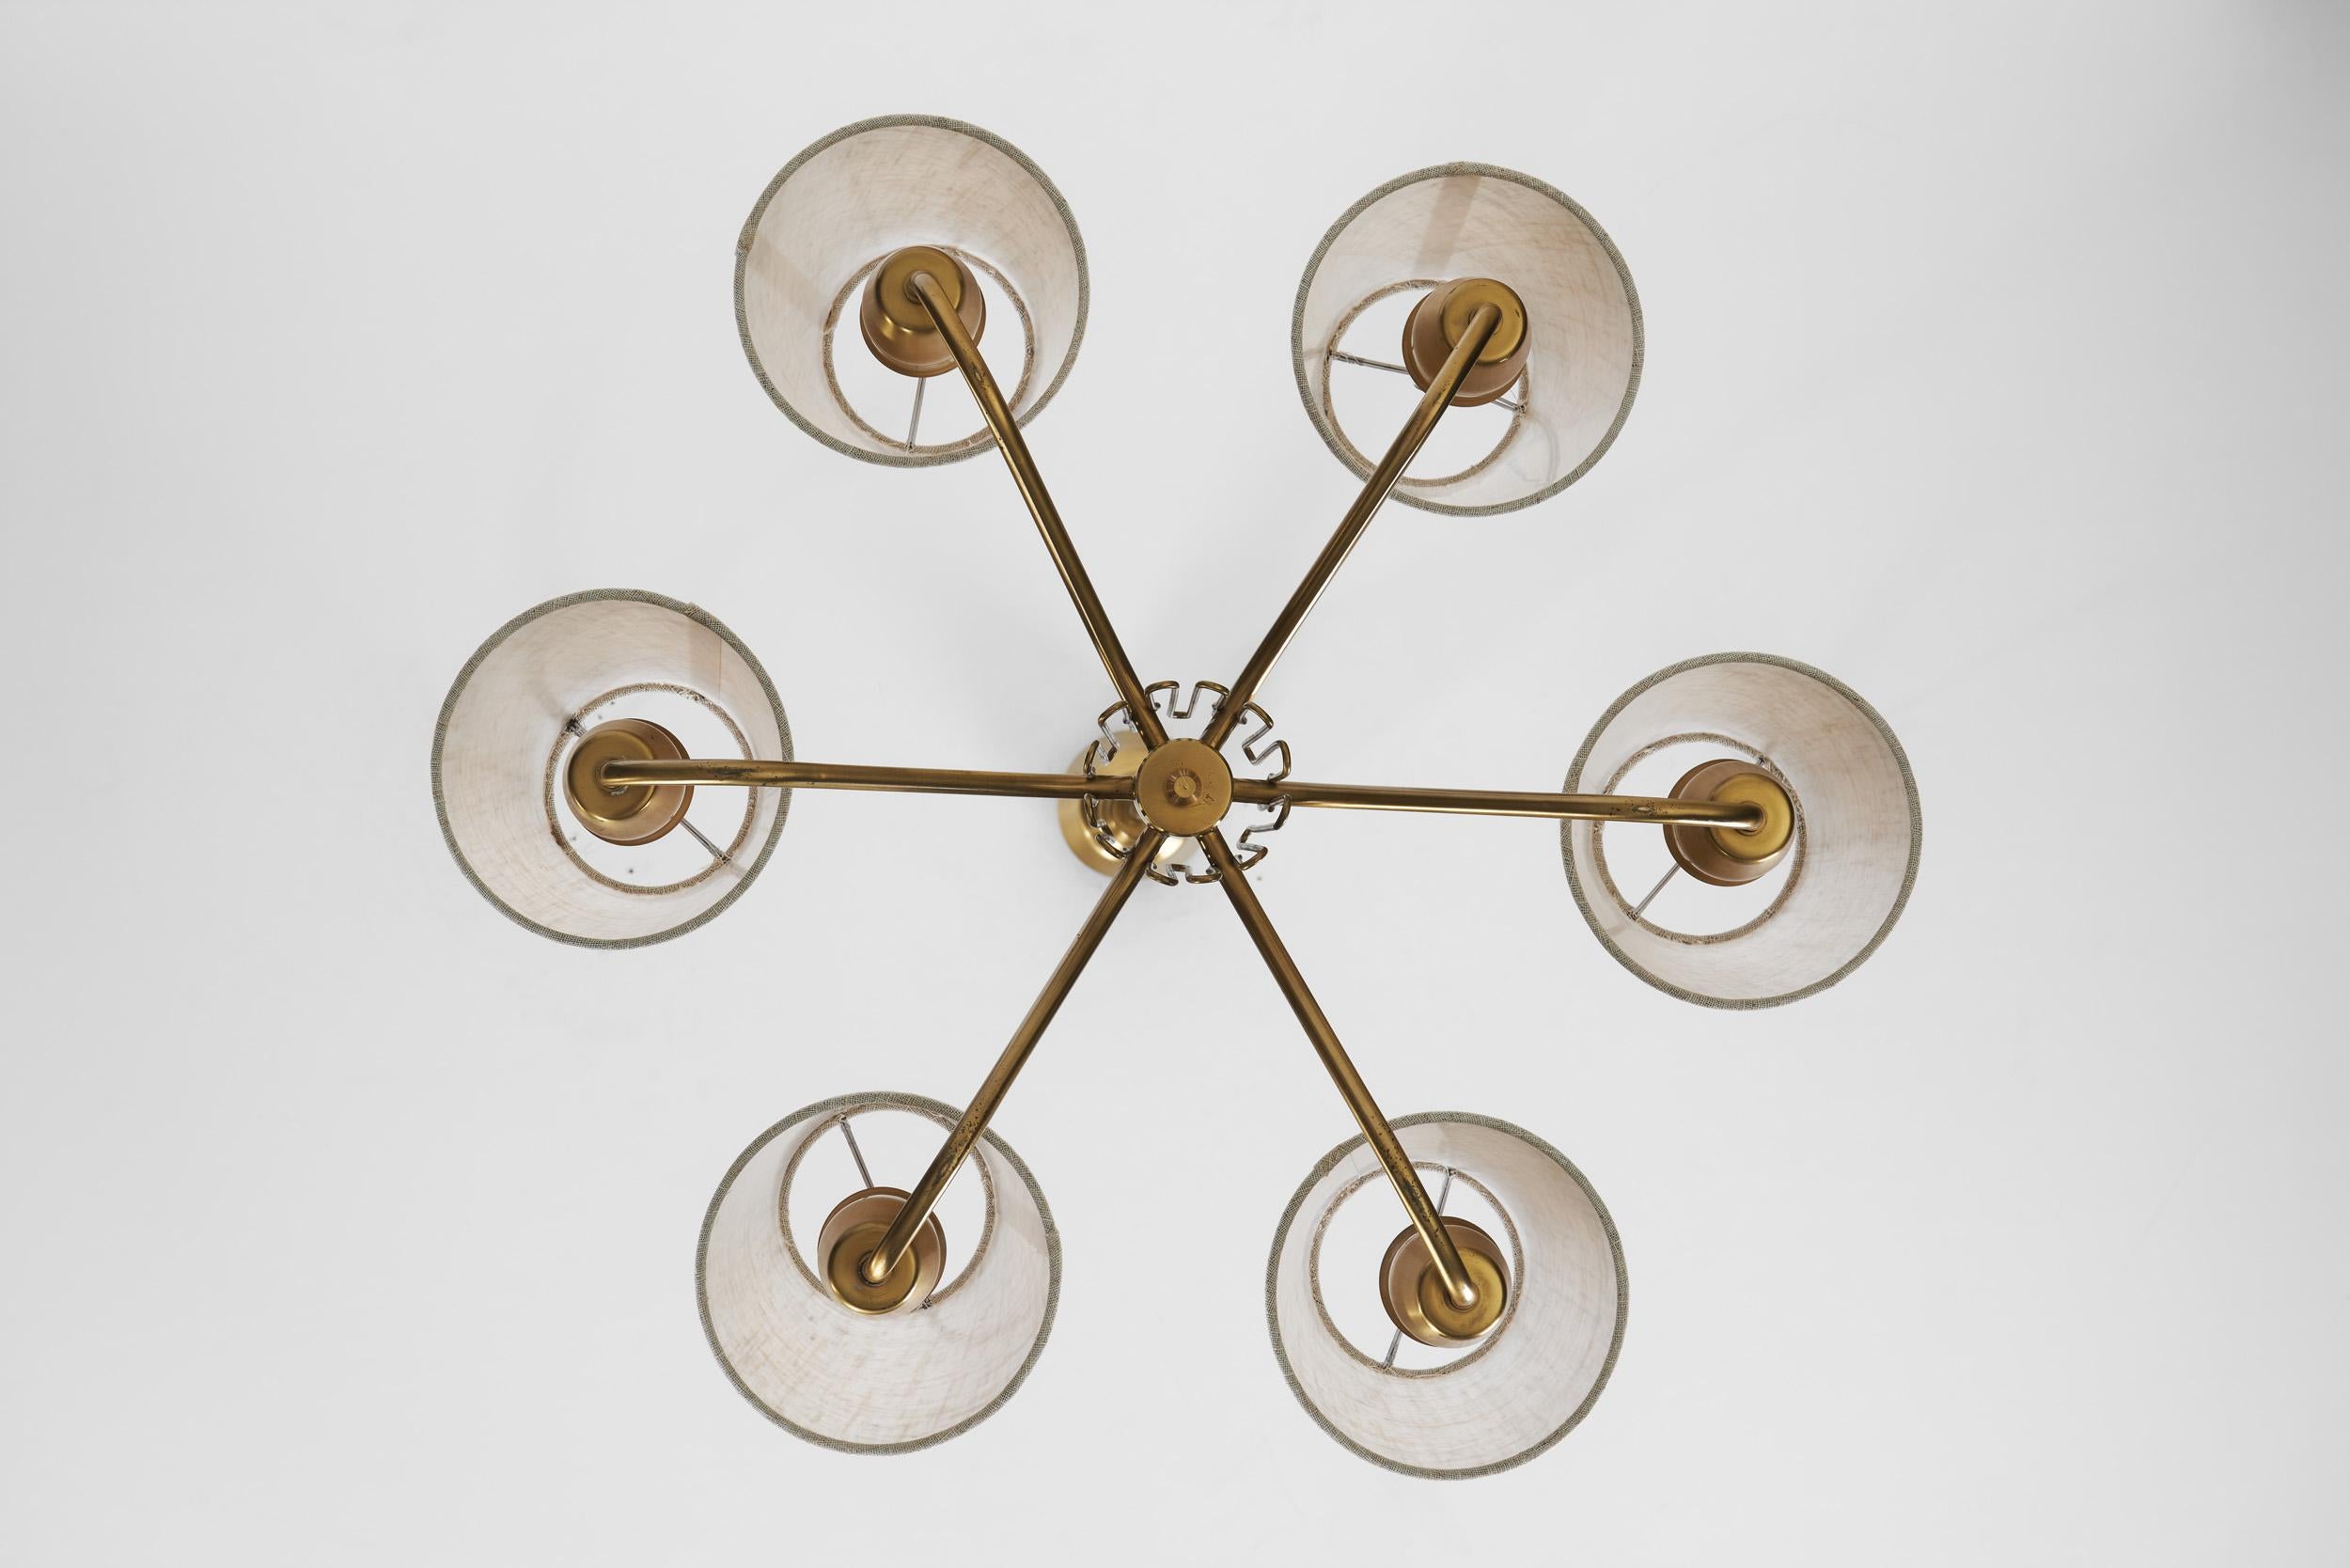 Swedish Modern Brass Ceiling Light with Fabric Shades, Sweden Mid-20th Century 15